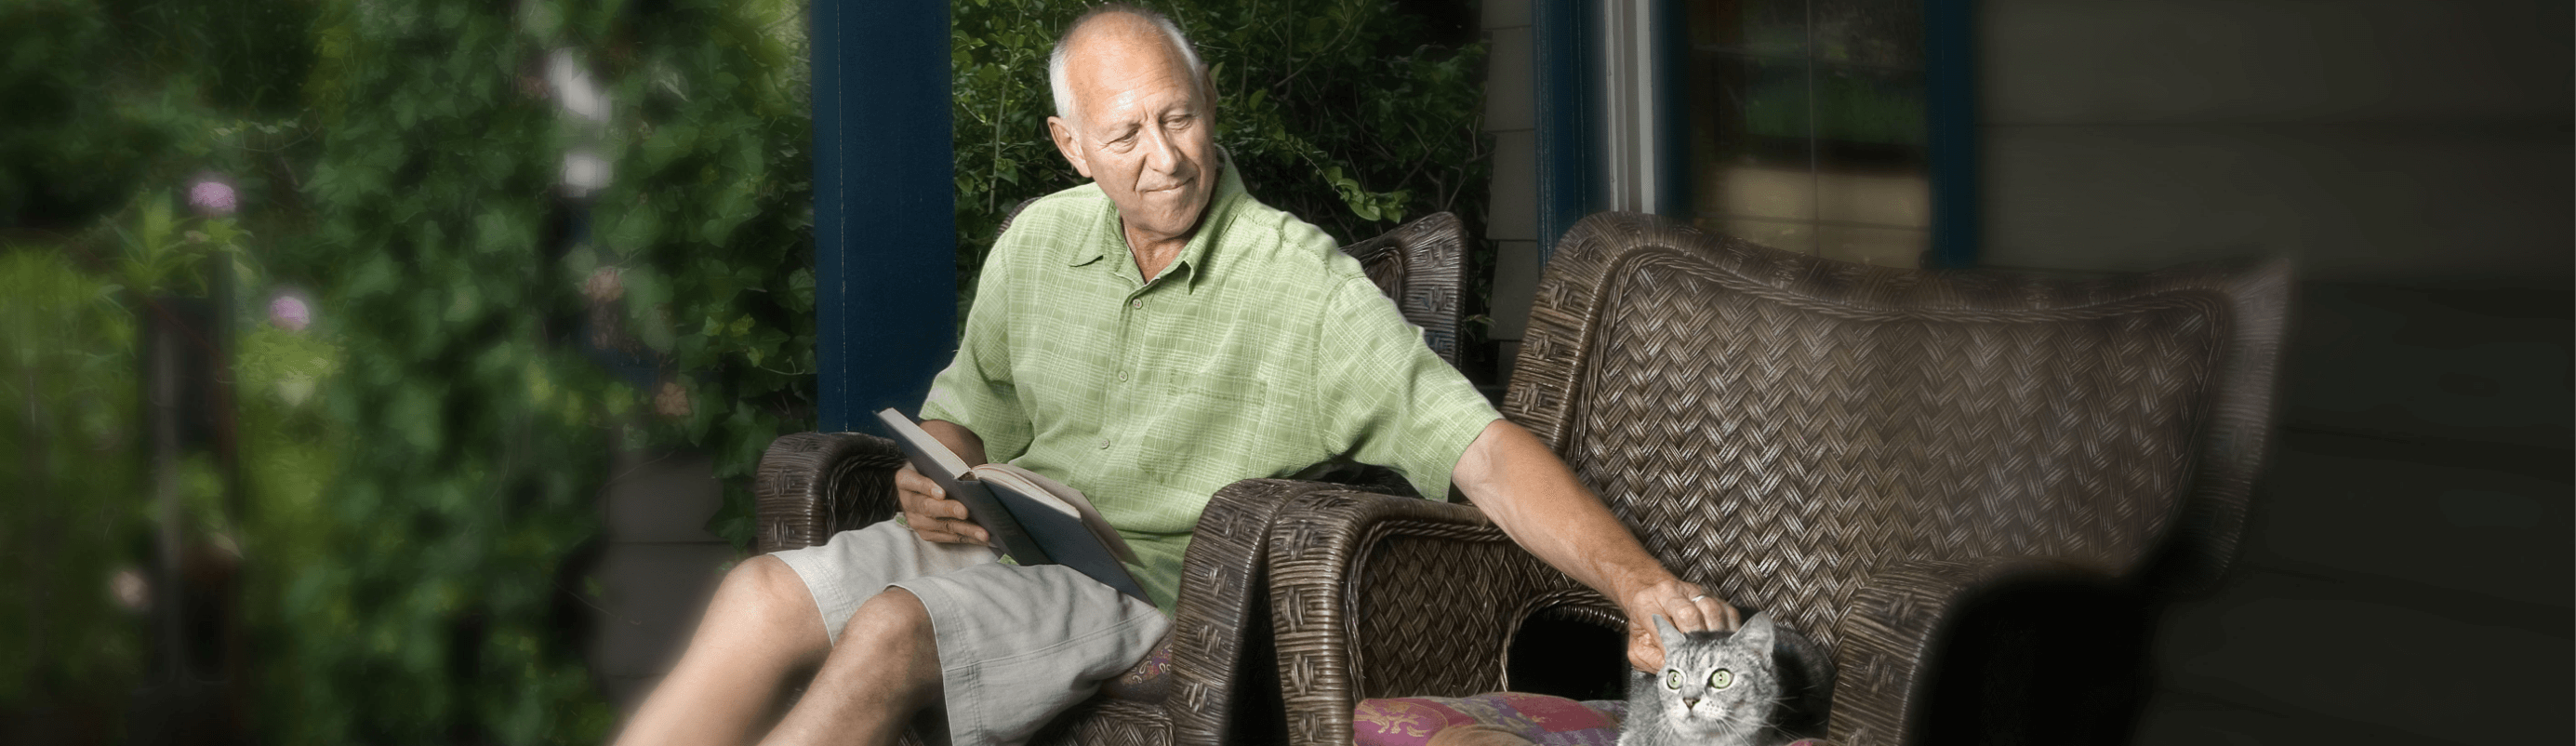 Man with metastatic pancreatic cancer sitting in outdoor chair with a book in his lap and petting a cat